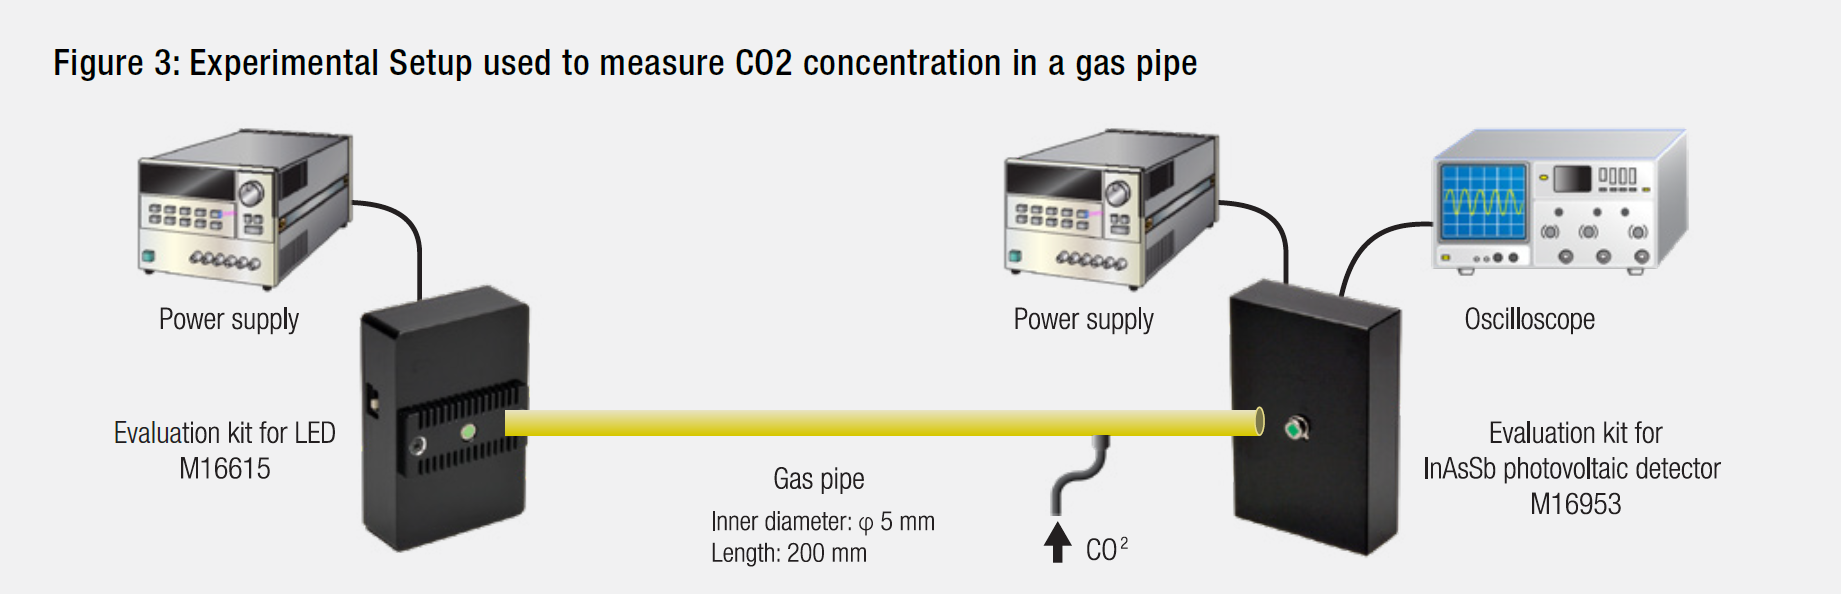 Figure 3: Experimental Setup used to measure CO2 concentration in a gas pipe